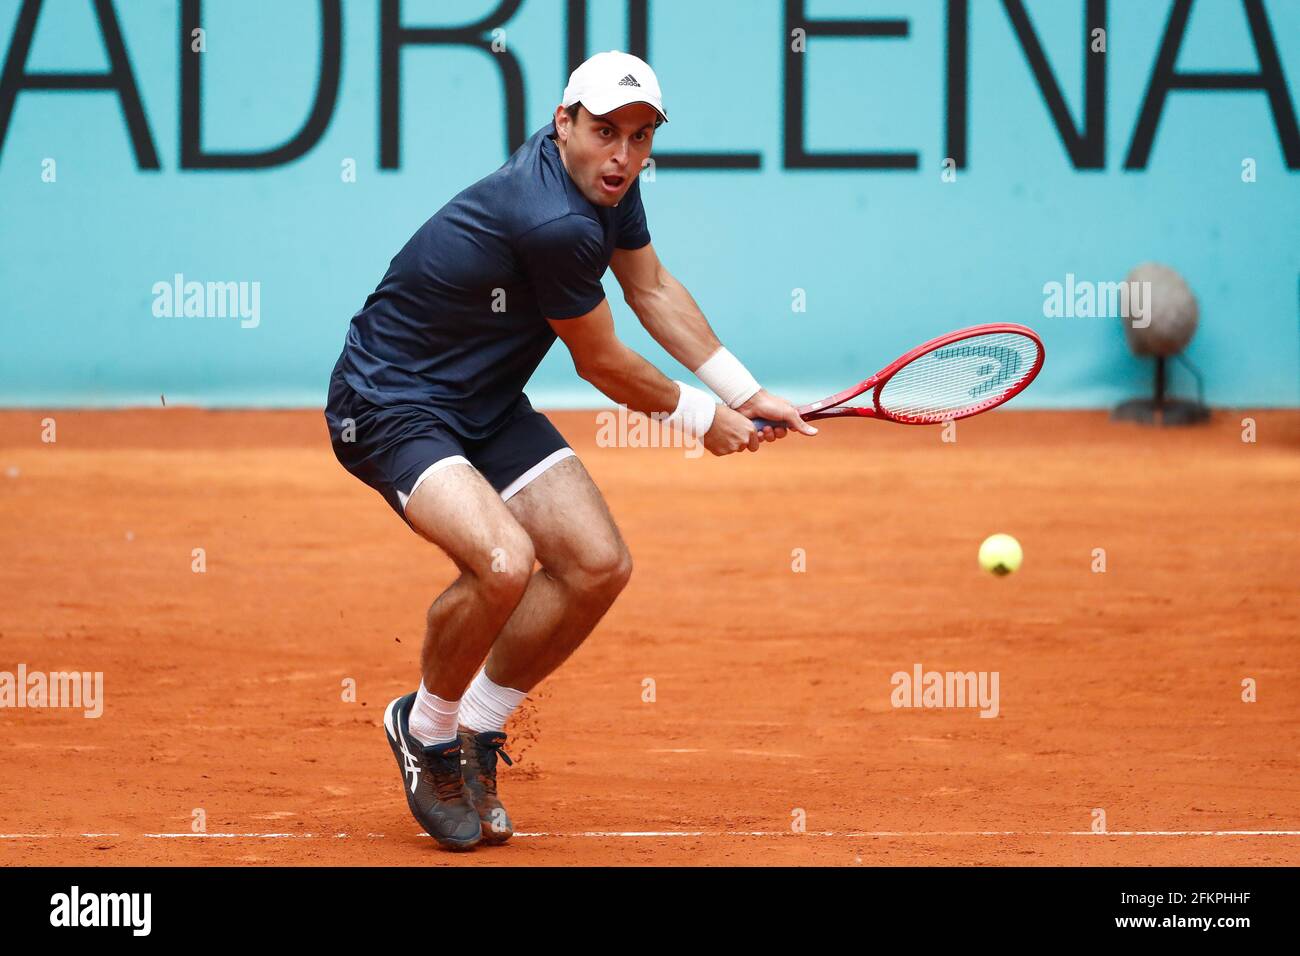 Aslan Karatsev of Russia in action during his Mens Singles match, round of 64, against Ugo Humbert of France on the Mutua Madrid Open 2021, Masters 1000 tennis tournament on May 3,